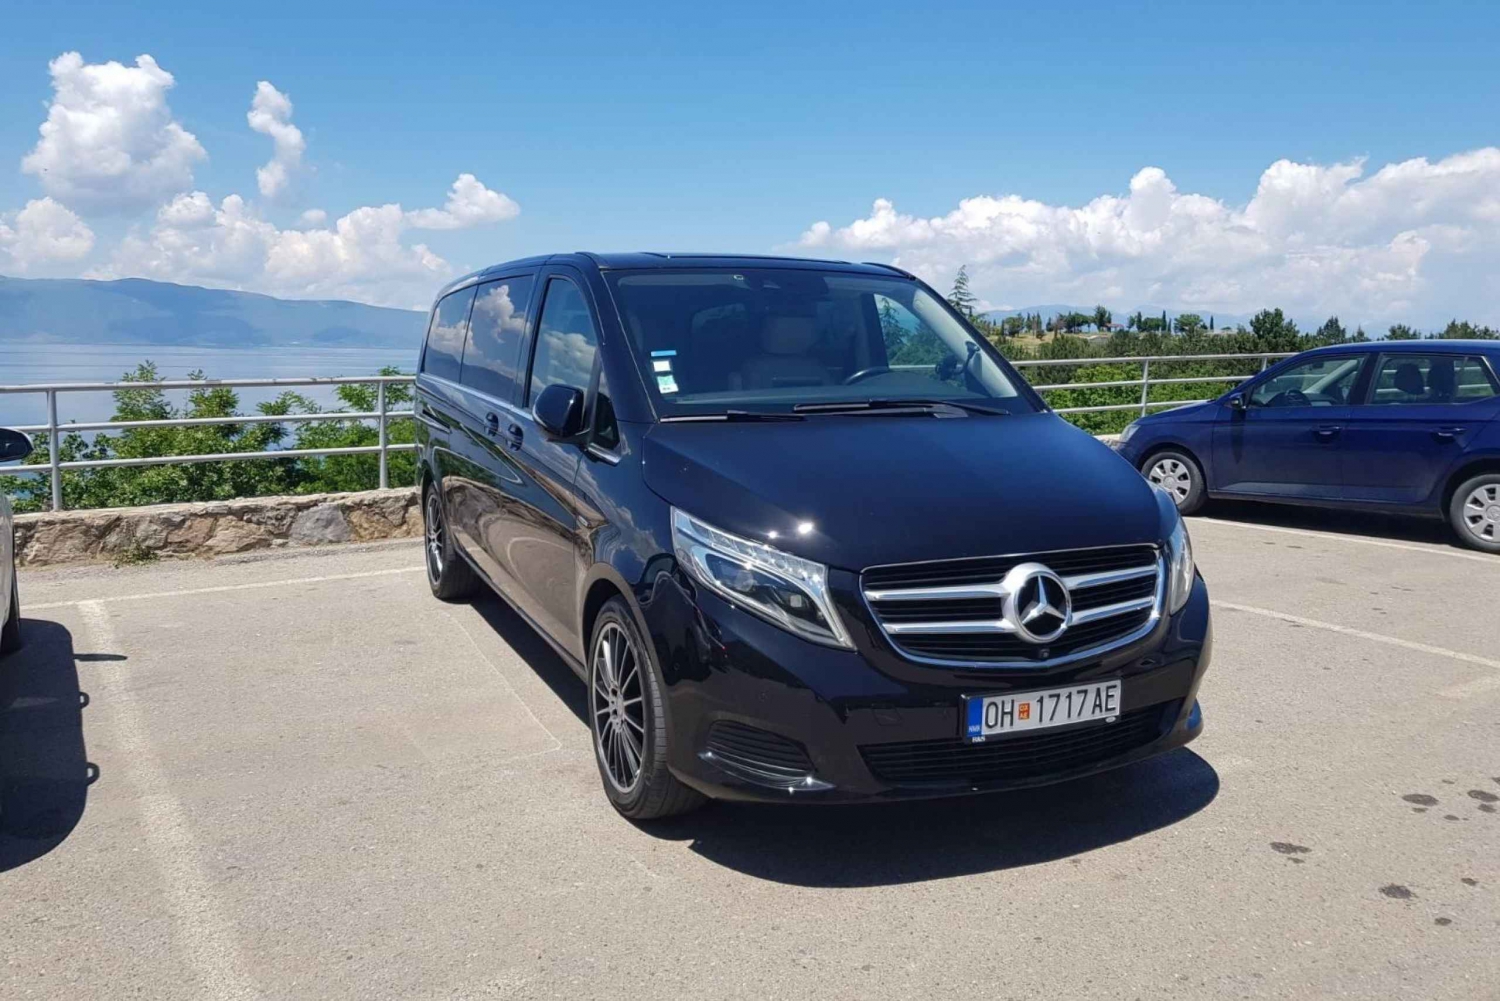 Private transfer from Ohrid to Bitola or back, 24-7!